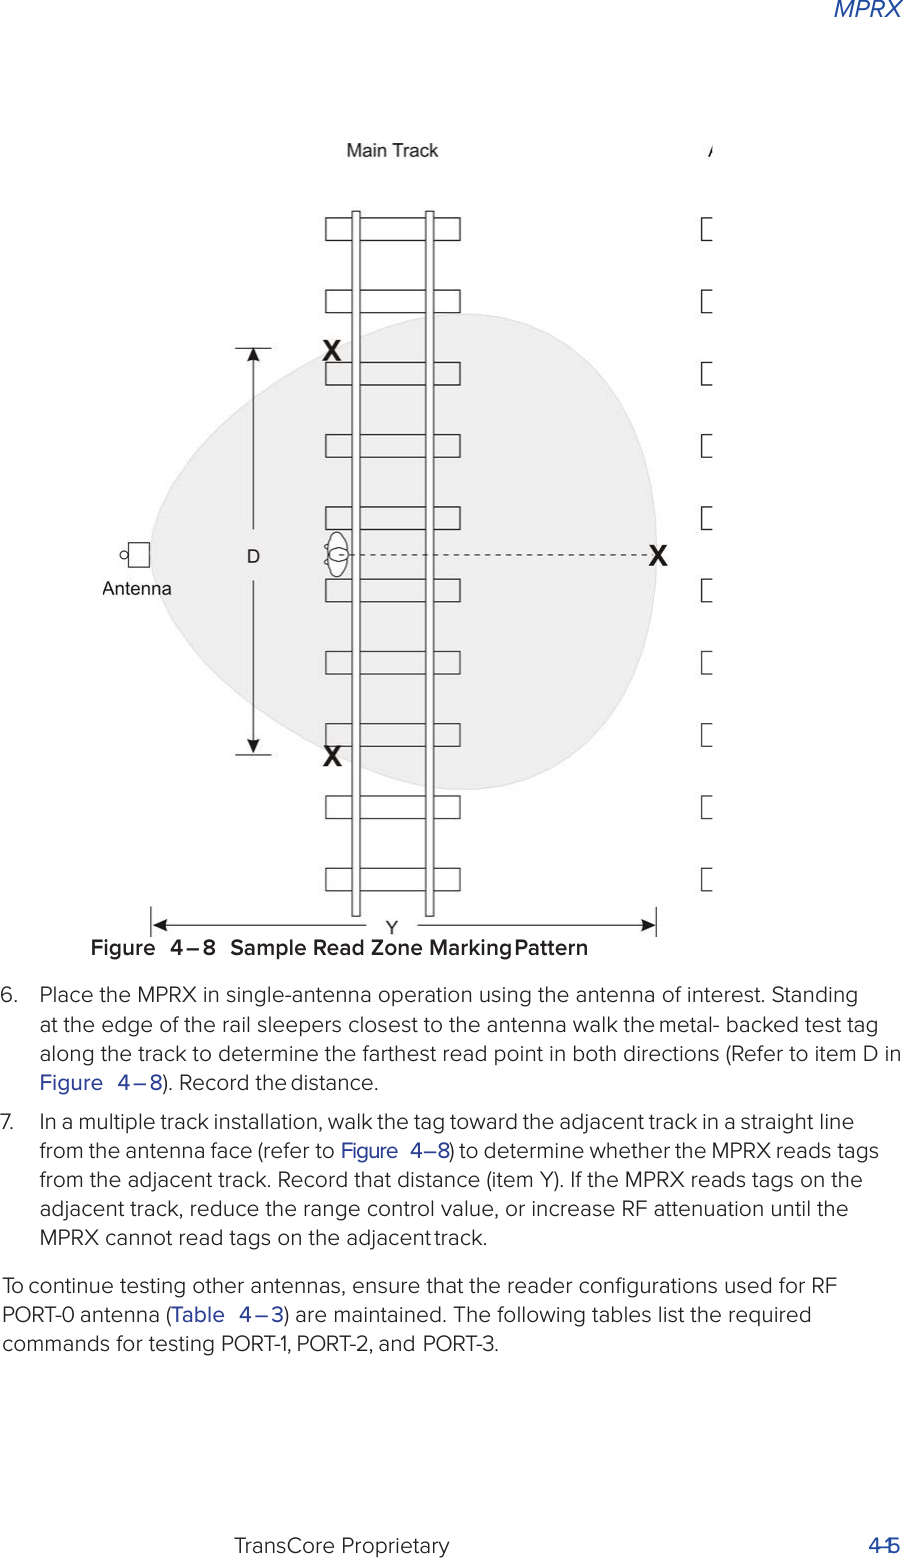 MPRXTransCore Proprietary 4–15Figure 4 – 8 Sample Read Zone Marking Pattern6.  Place the MPRX in single-antenna operation using the antenna of interest. Standing at the edge of the rail sleepers closest to the antenna walk the metal- backed test tag along the track to determine the farthest read point in both directions (Refer to item D in Figure 4 – 8). Record the distance.7.  In a multiple track installation, walk the tag toward the adjacent track in a straight line from the antenna face (refer to Figure 4 – 8) to determine whether the MPRX reads tags from the adjacent track. Record that distance (item Y). If the MPRX reads tags on the adjacent track, reduce the range control value, or increase RF attenuation until the MPRX cannot read tags on the adjacent track.To continue testing other antennas, ensure that the reader conﬁgurations used for RF PORT-0 antenna (Table 4 – 3) are maintained. The following tables list the required commands for testing PORT-1, PORT-2, and PORT-3.